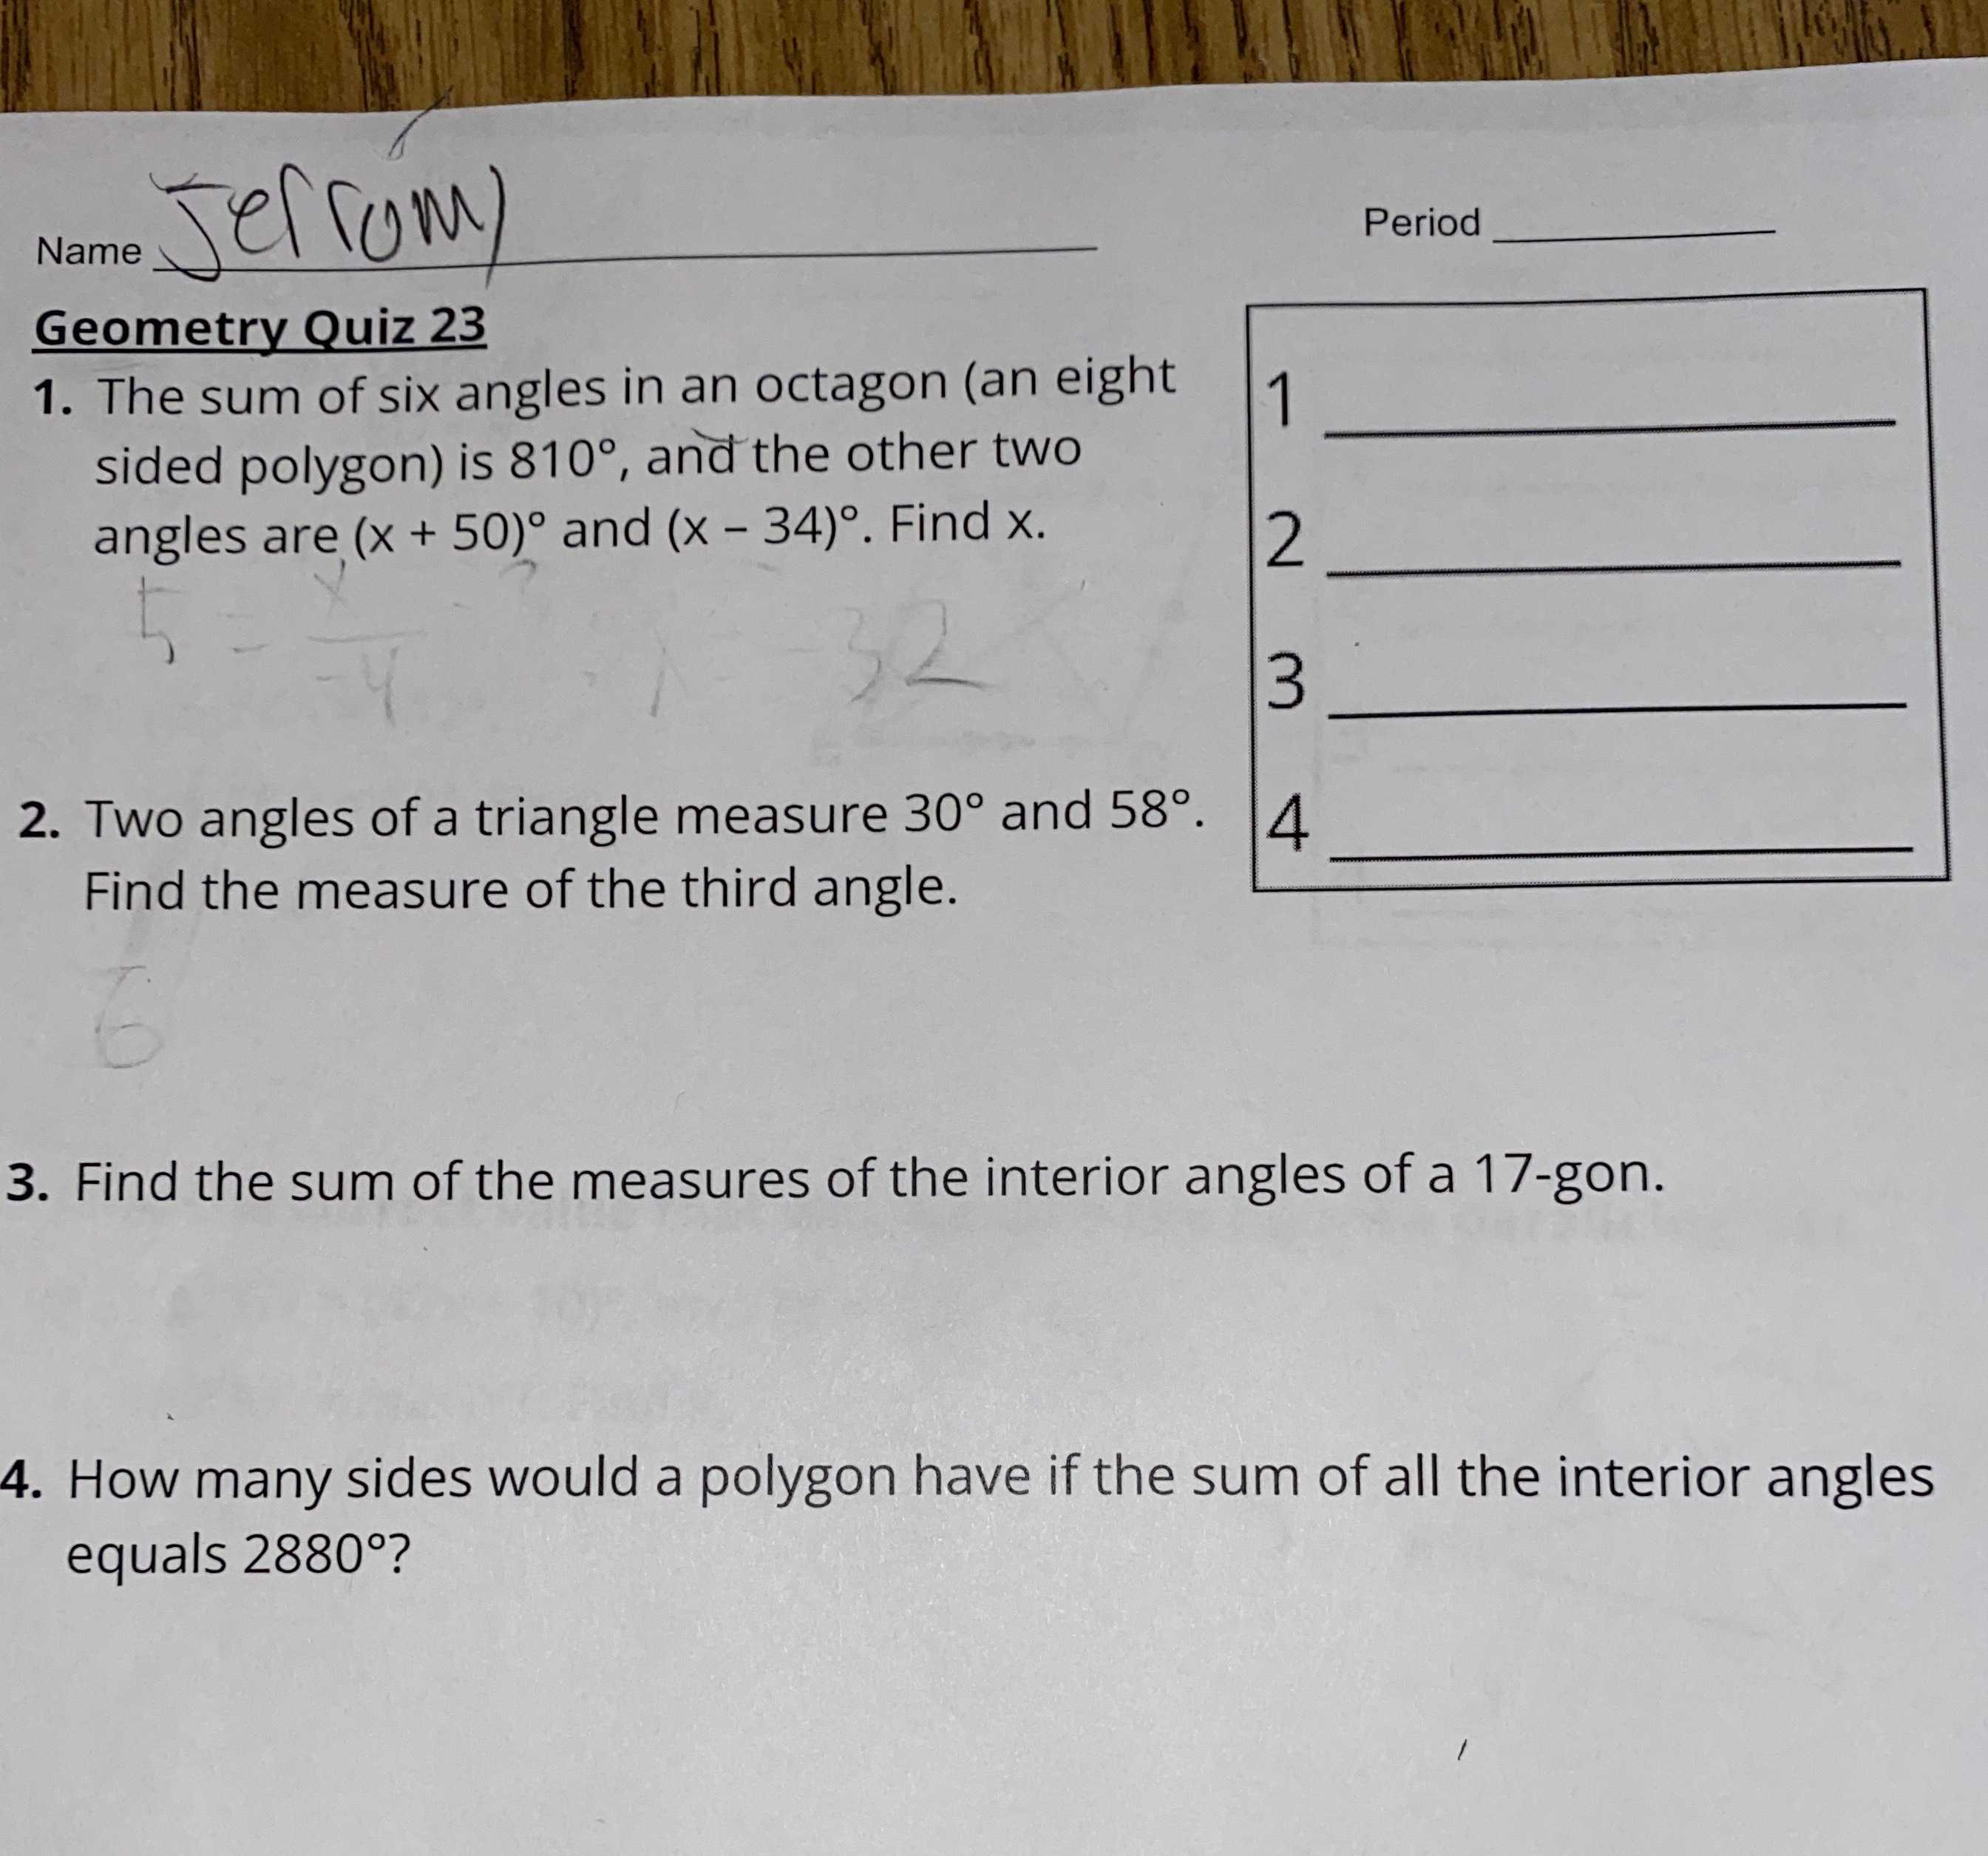 1. The sum of six angles in an octagon (an eight s...